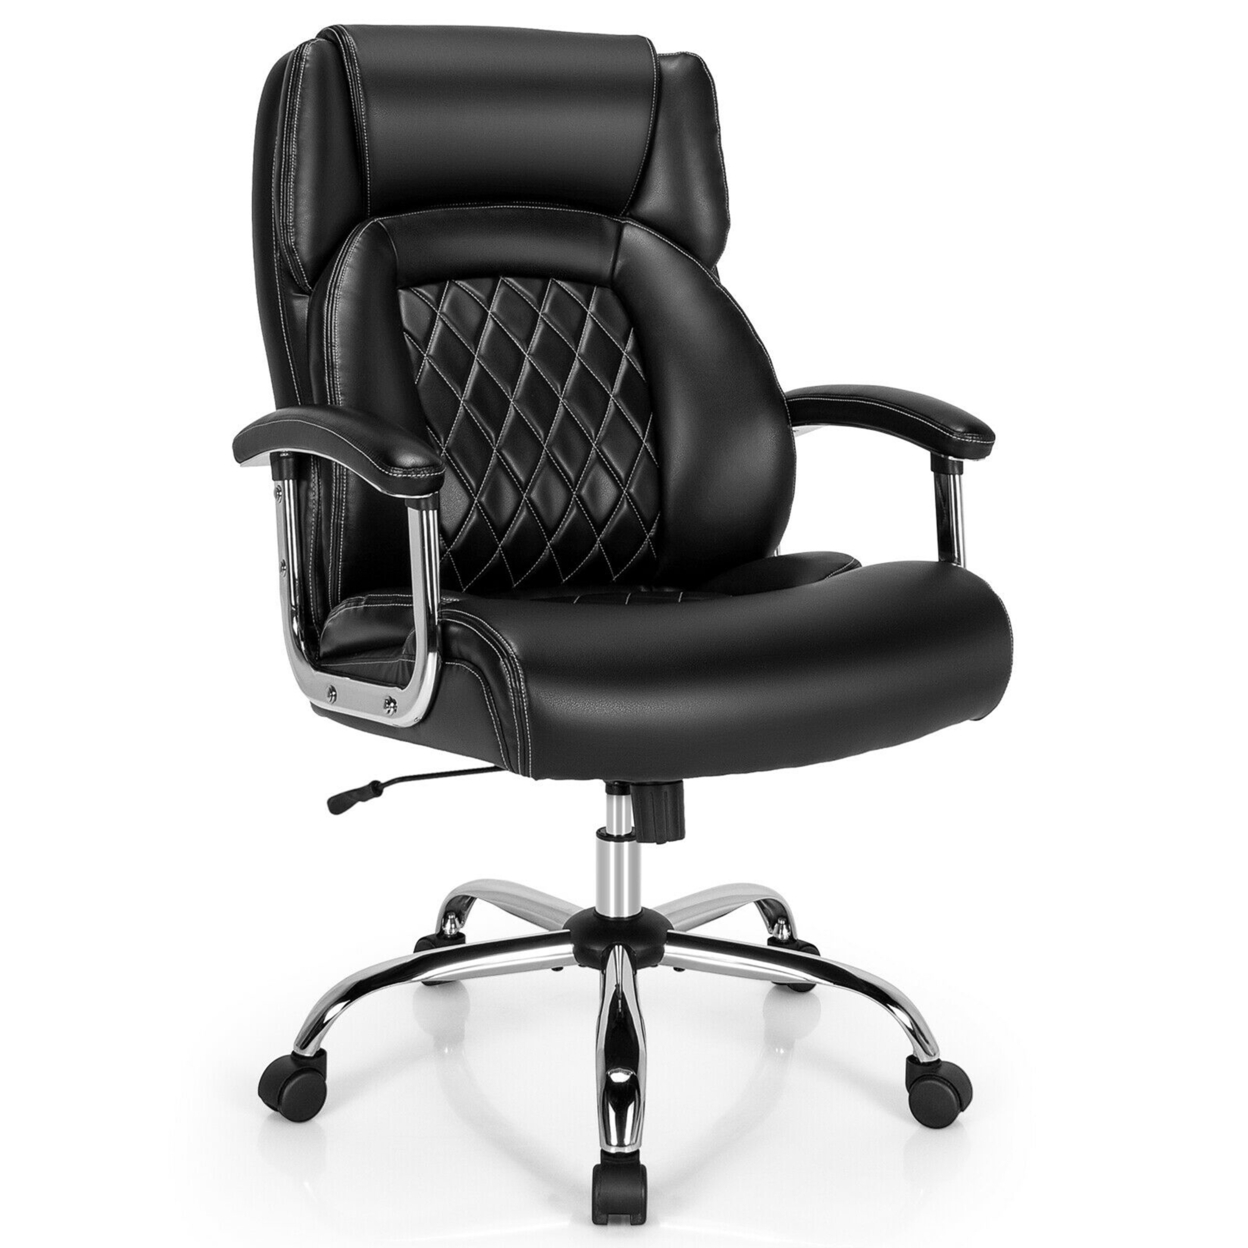 500LBS High Back Big & Tall Office Chair Adjustable Leather Task Chair